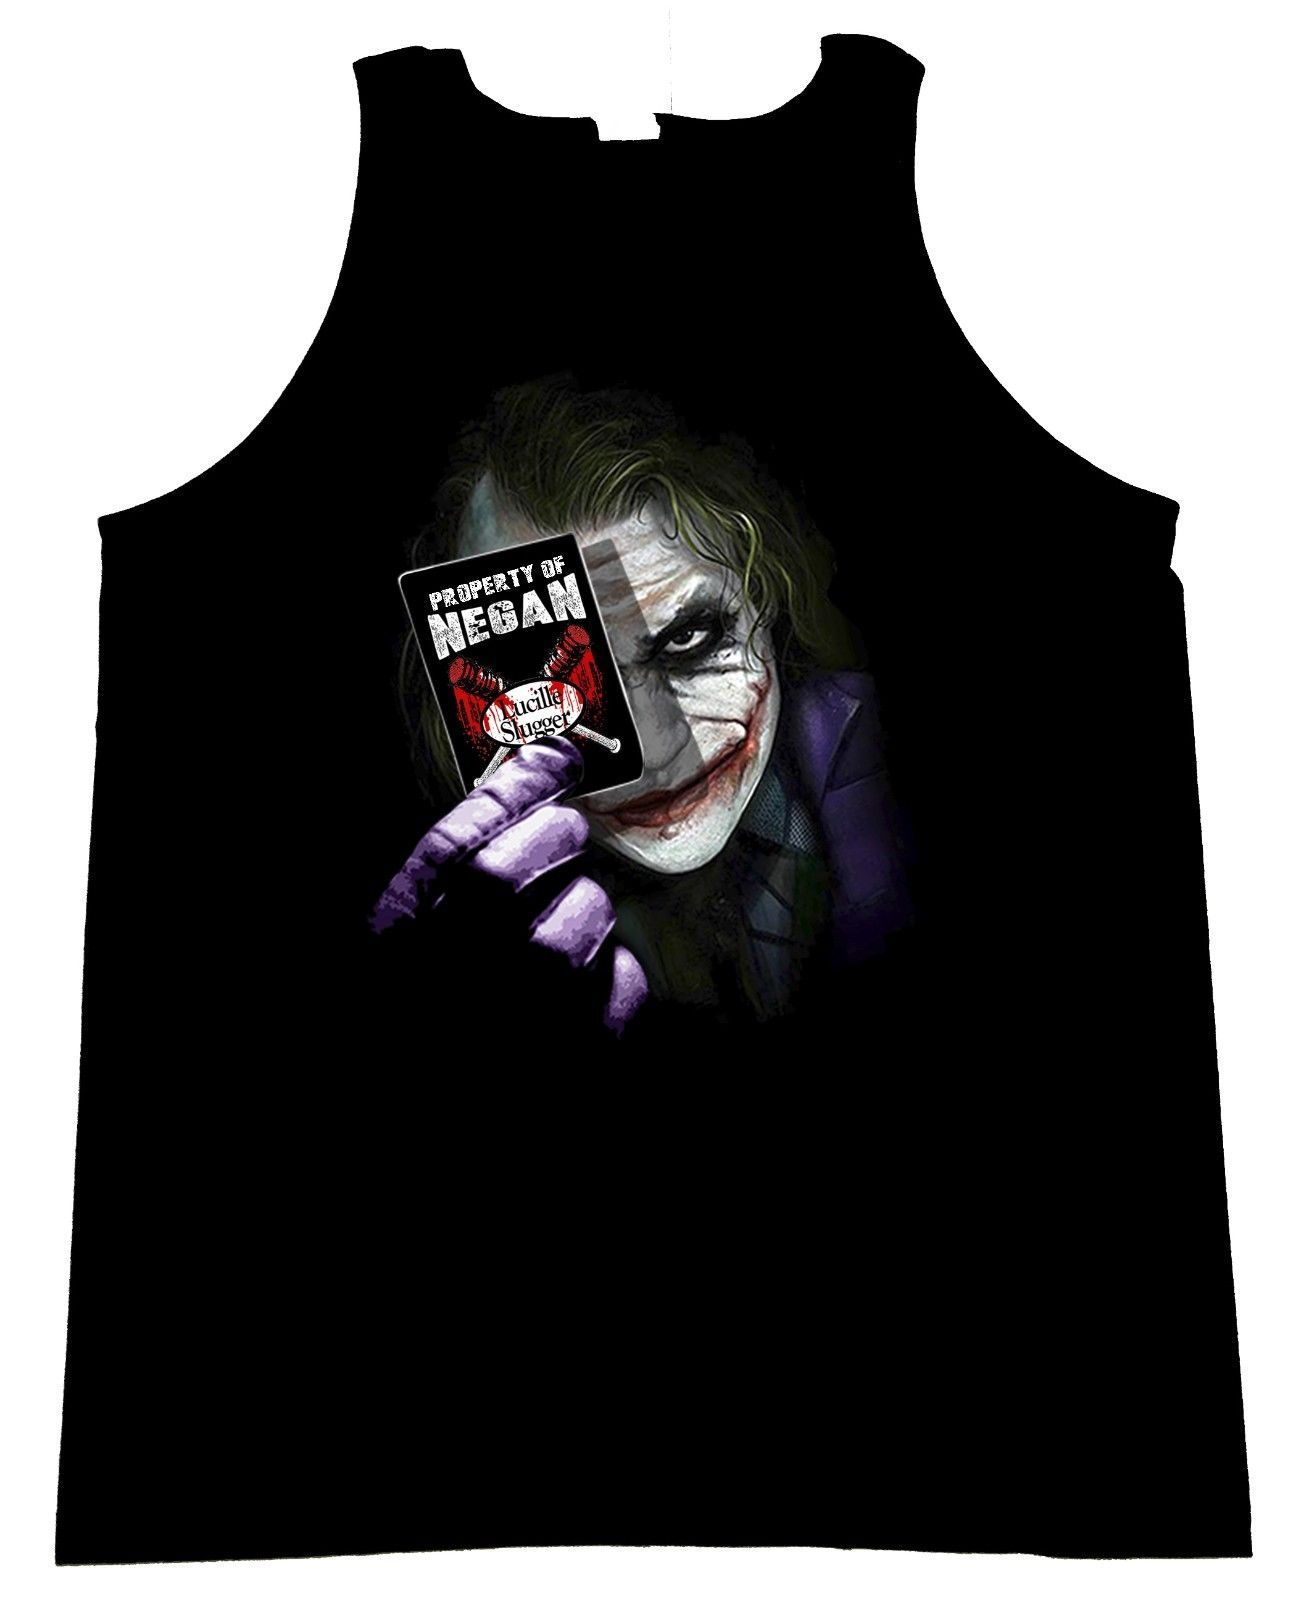 The Joker With Card and The Walking Dead Negan Lucille Image Men's Tank Top